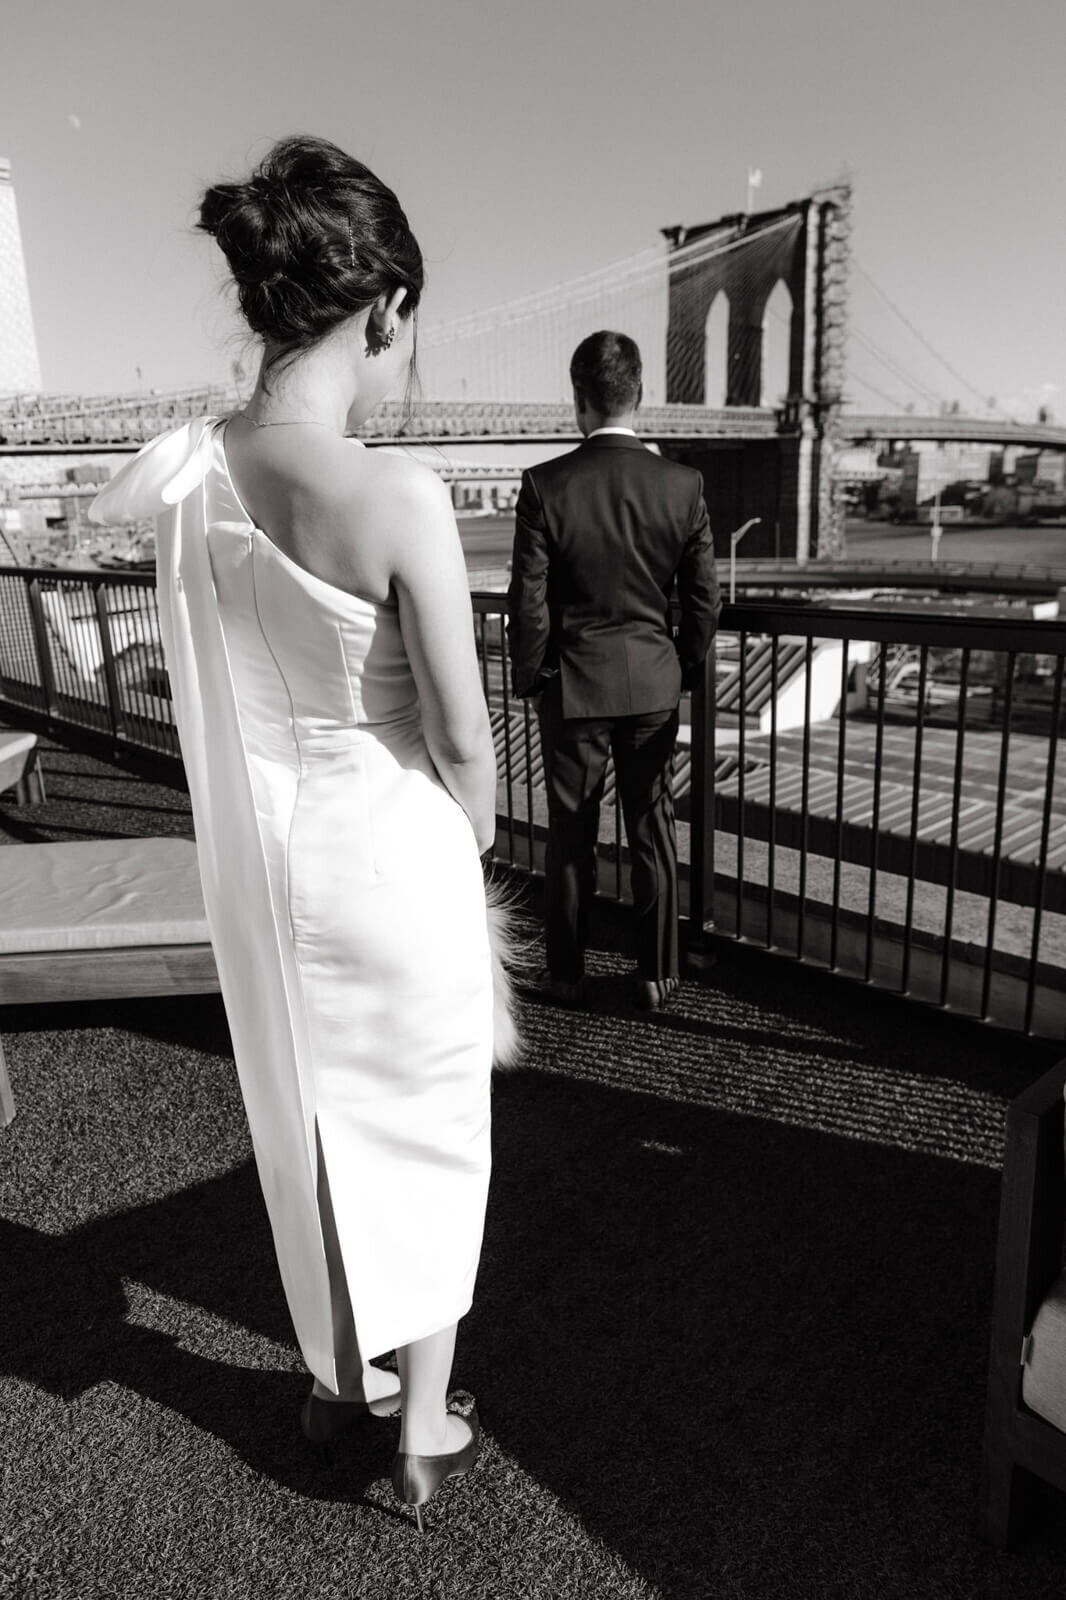 The bride and groom are on their backs, on a terrace, looking towards Brooklyn bridge.